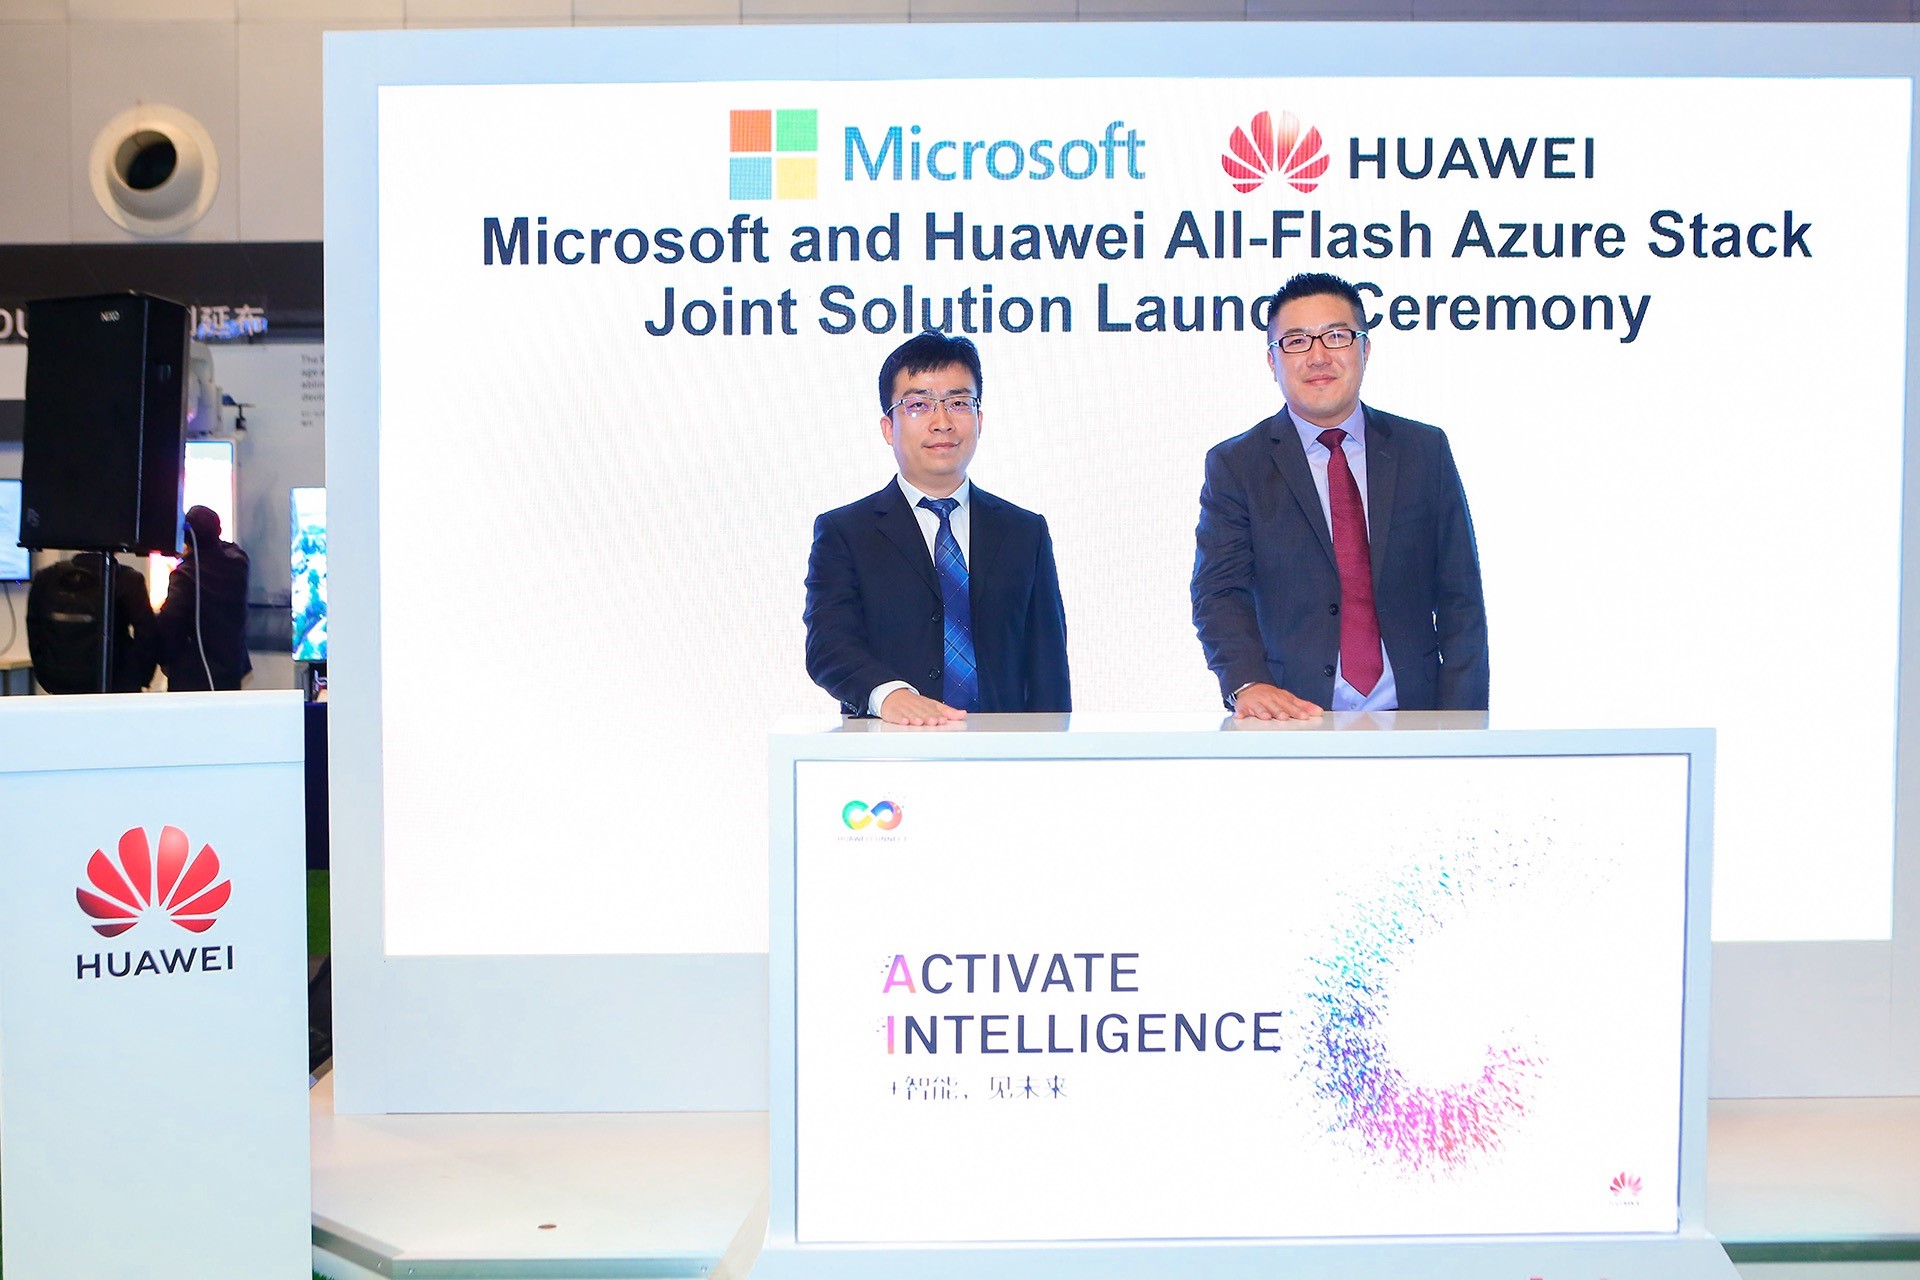 Two executives standing behind a podium at the Microsoft and Huawei All-Flash Azure Stack Joint Solution launch ceremony